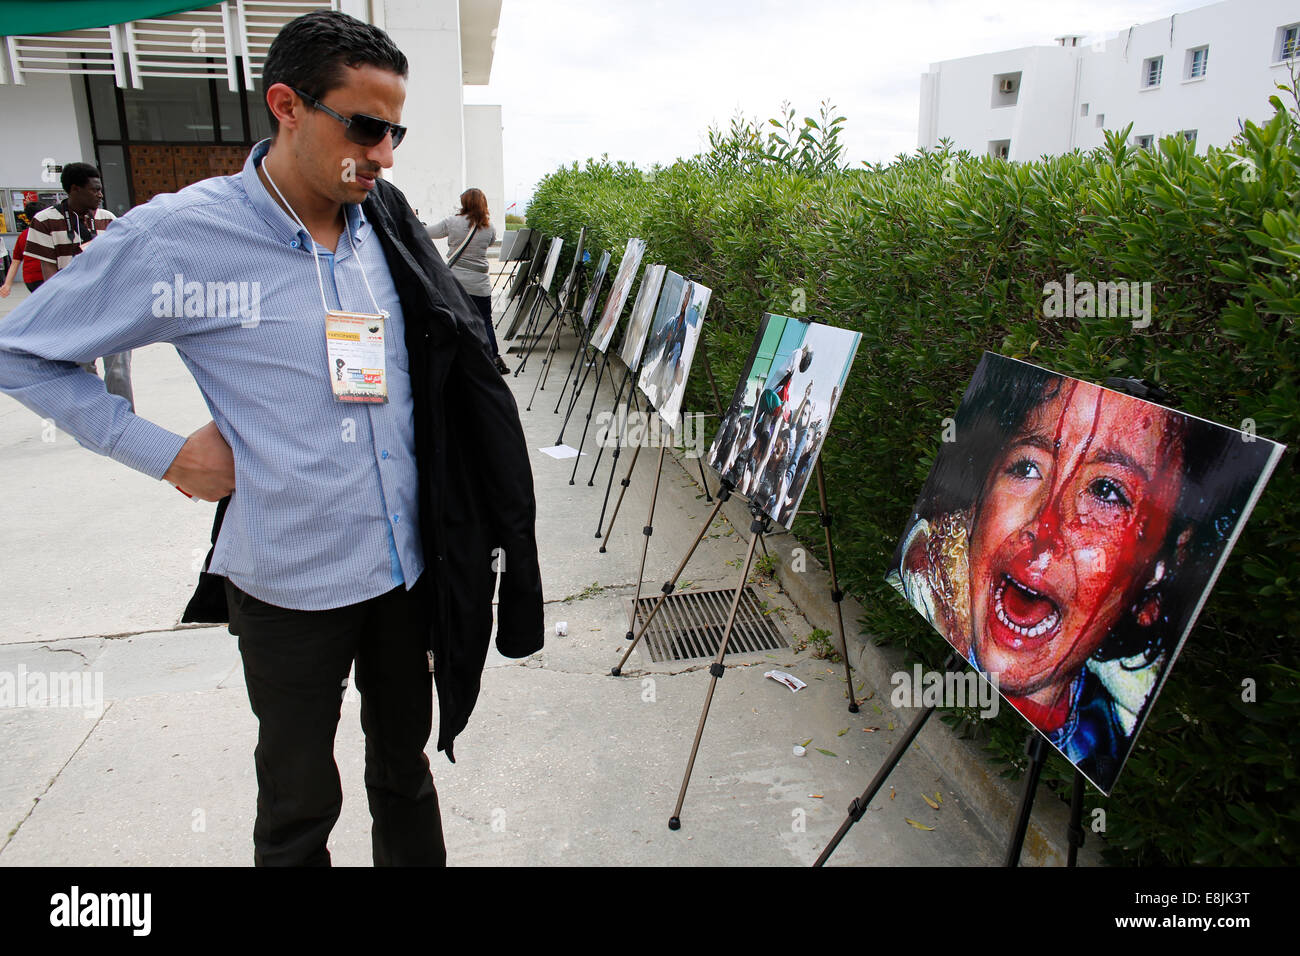 Man looking at a gruesome photograph at the World Social Forum in Tunis Stock Photo